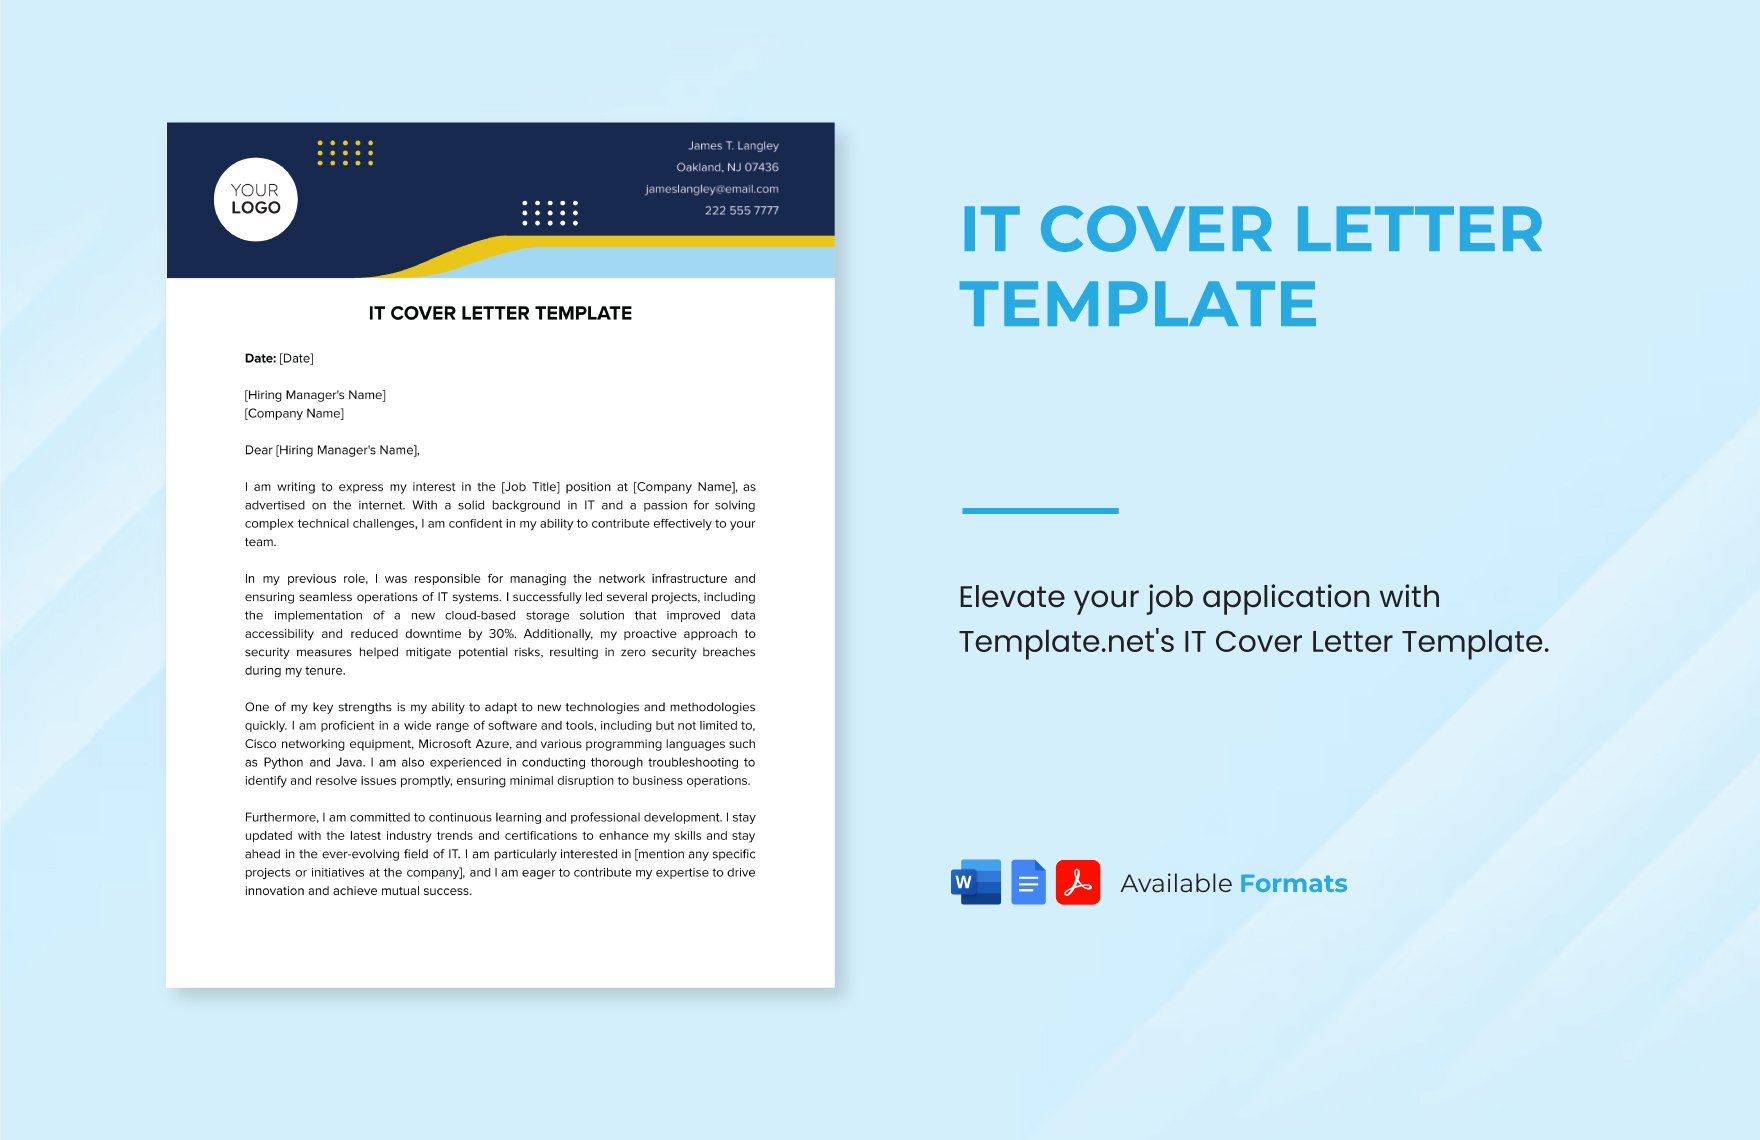 IT Cover Letter Template